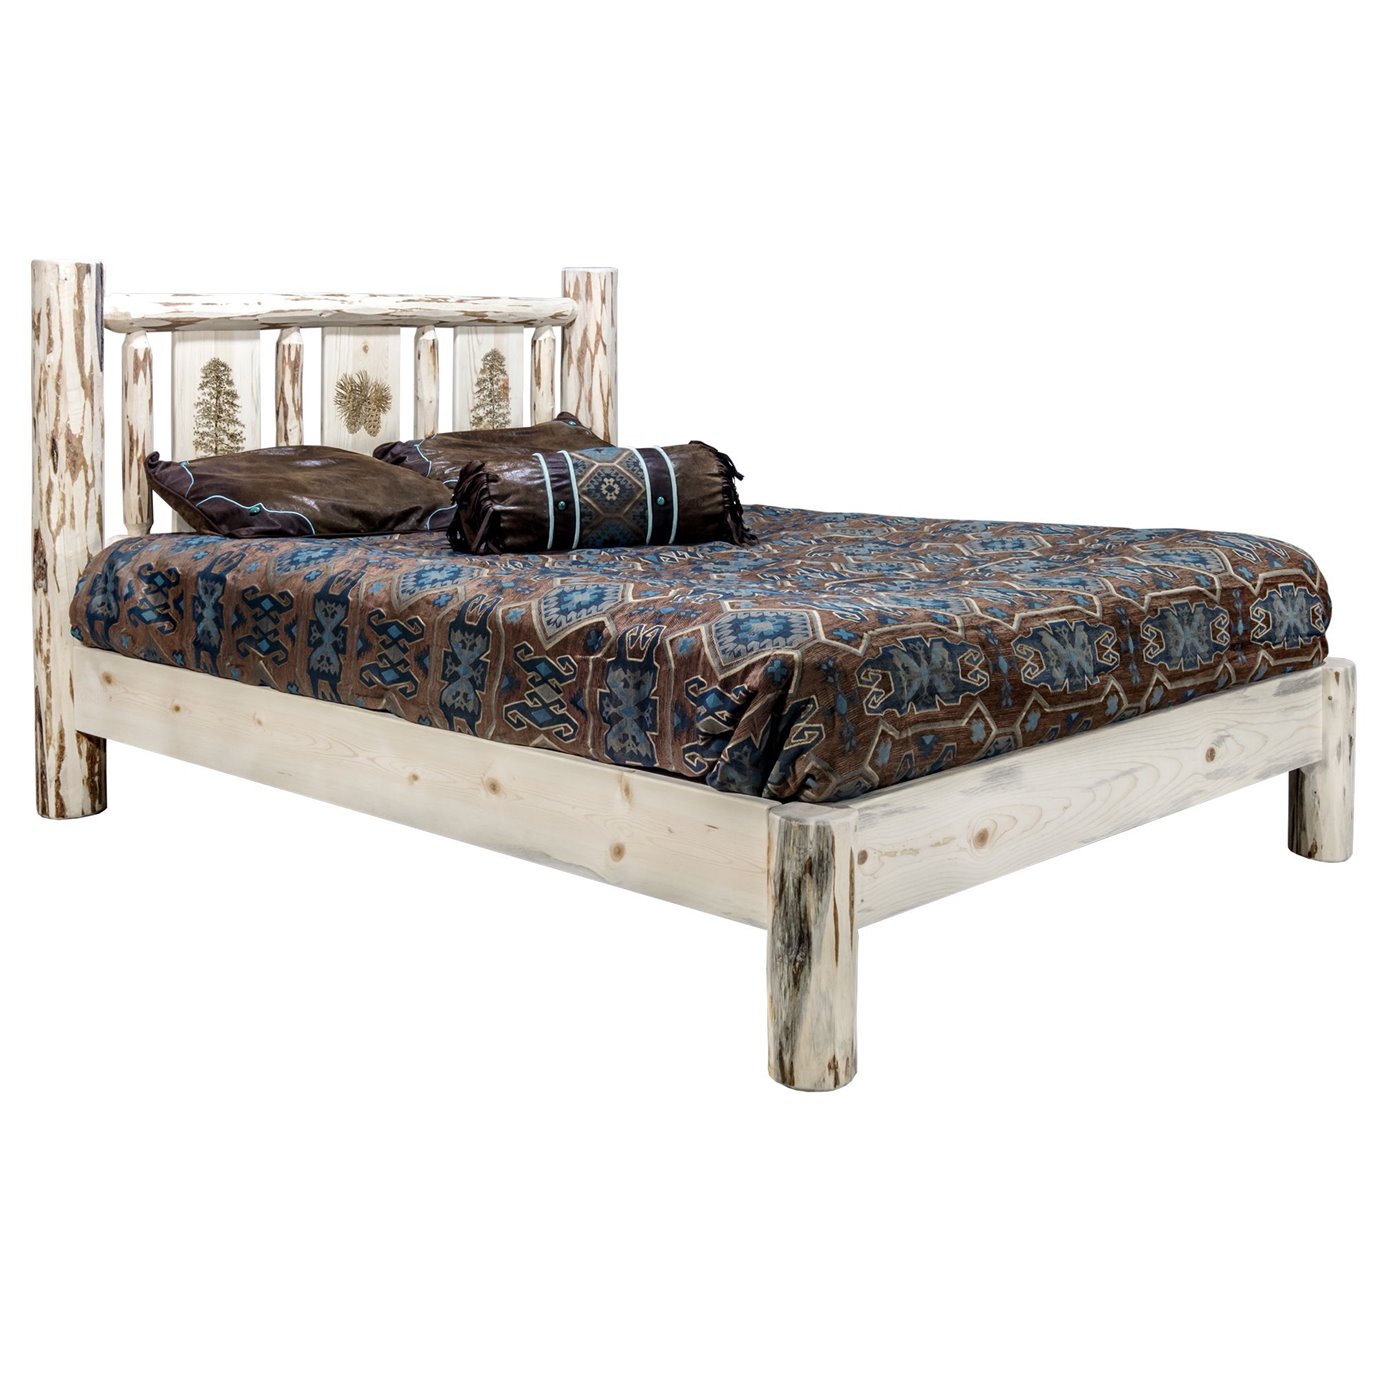 Montana Cal King Platform Bed w/ Laser Engraved Pine Tree Design - Clear Lacquer Finish